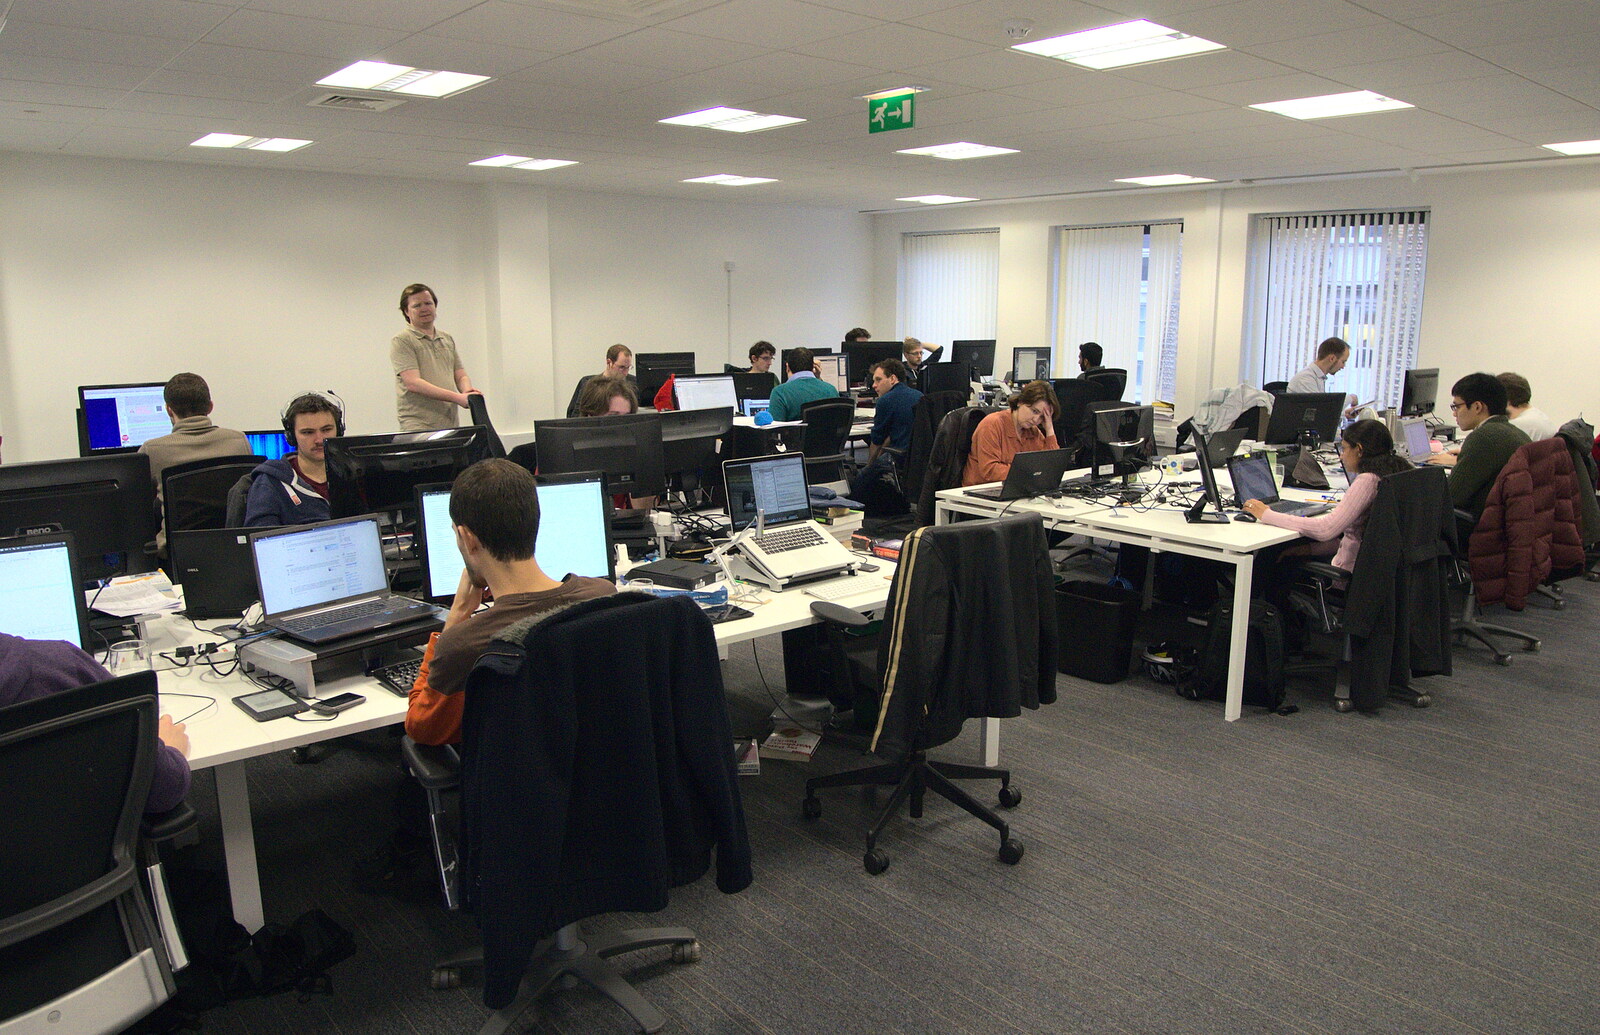 The engineering department from Lord Green Visits SwiftKey, Southwark, London - 21st November 2012